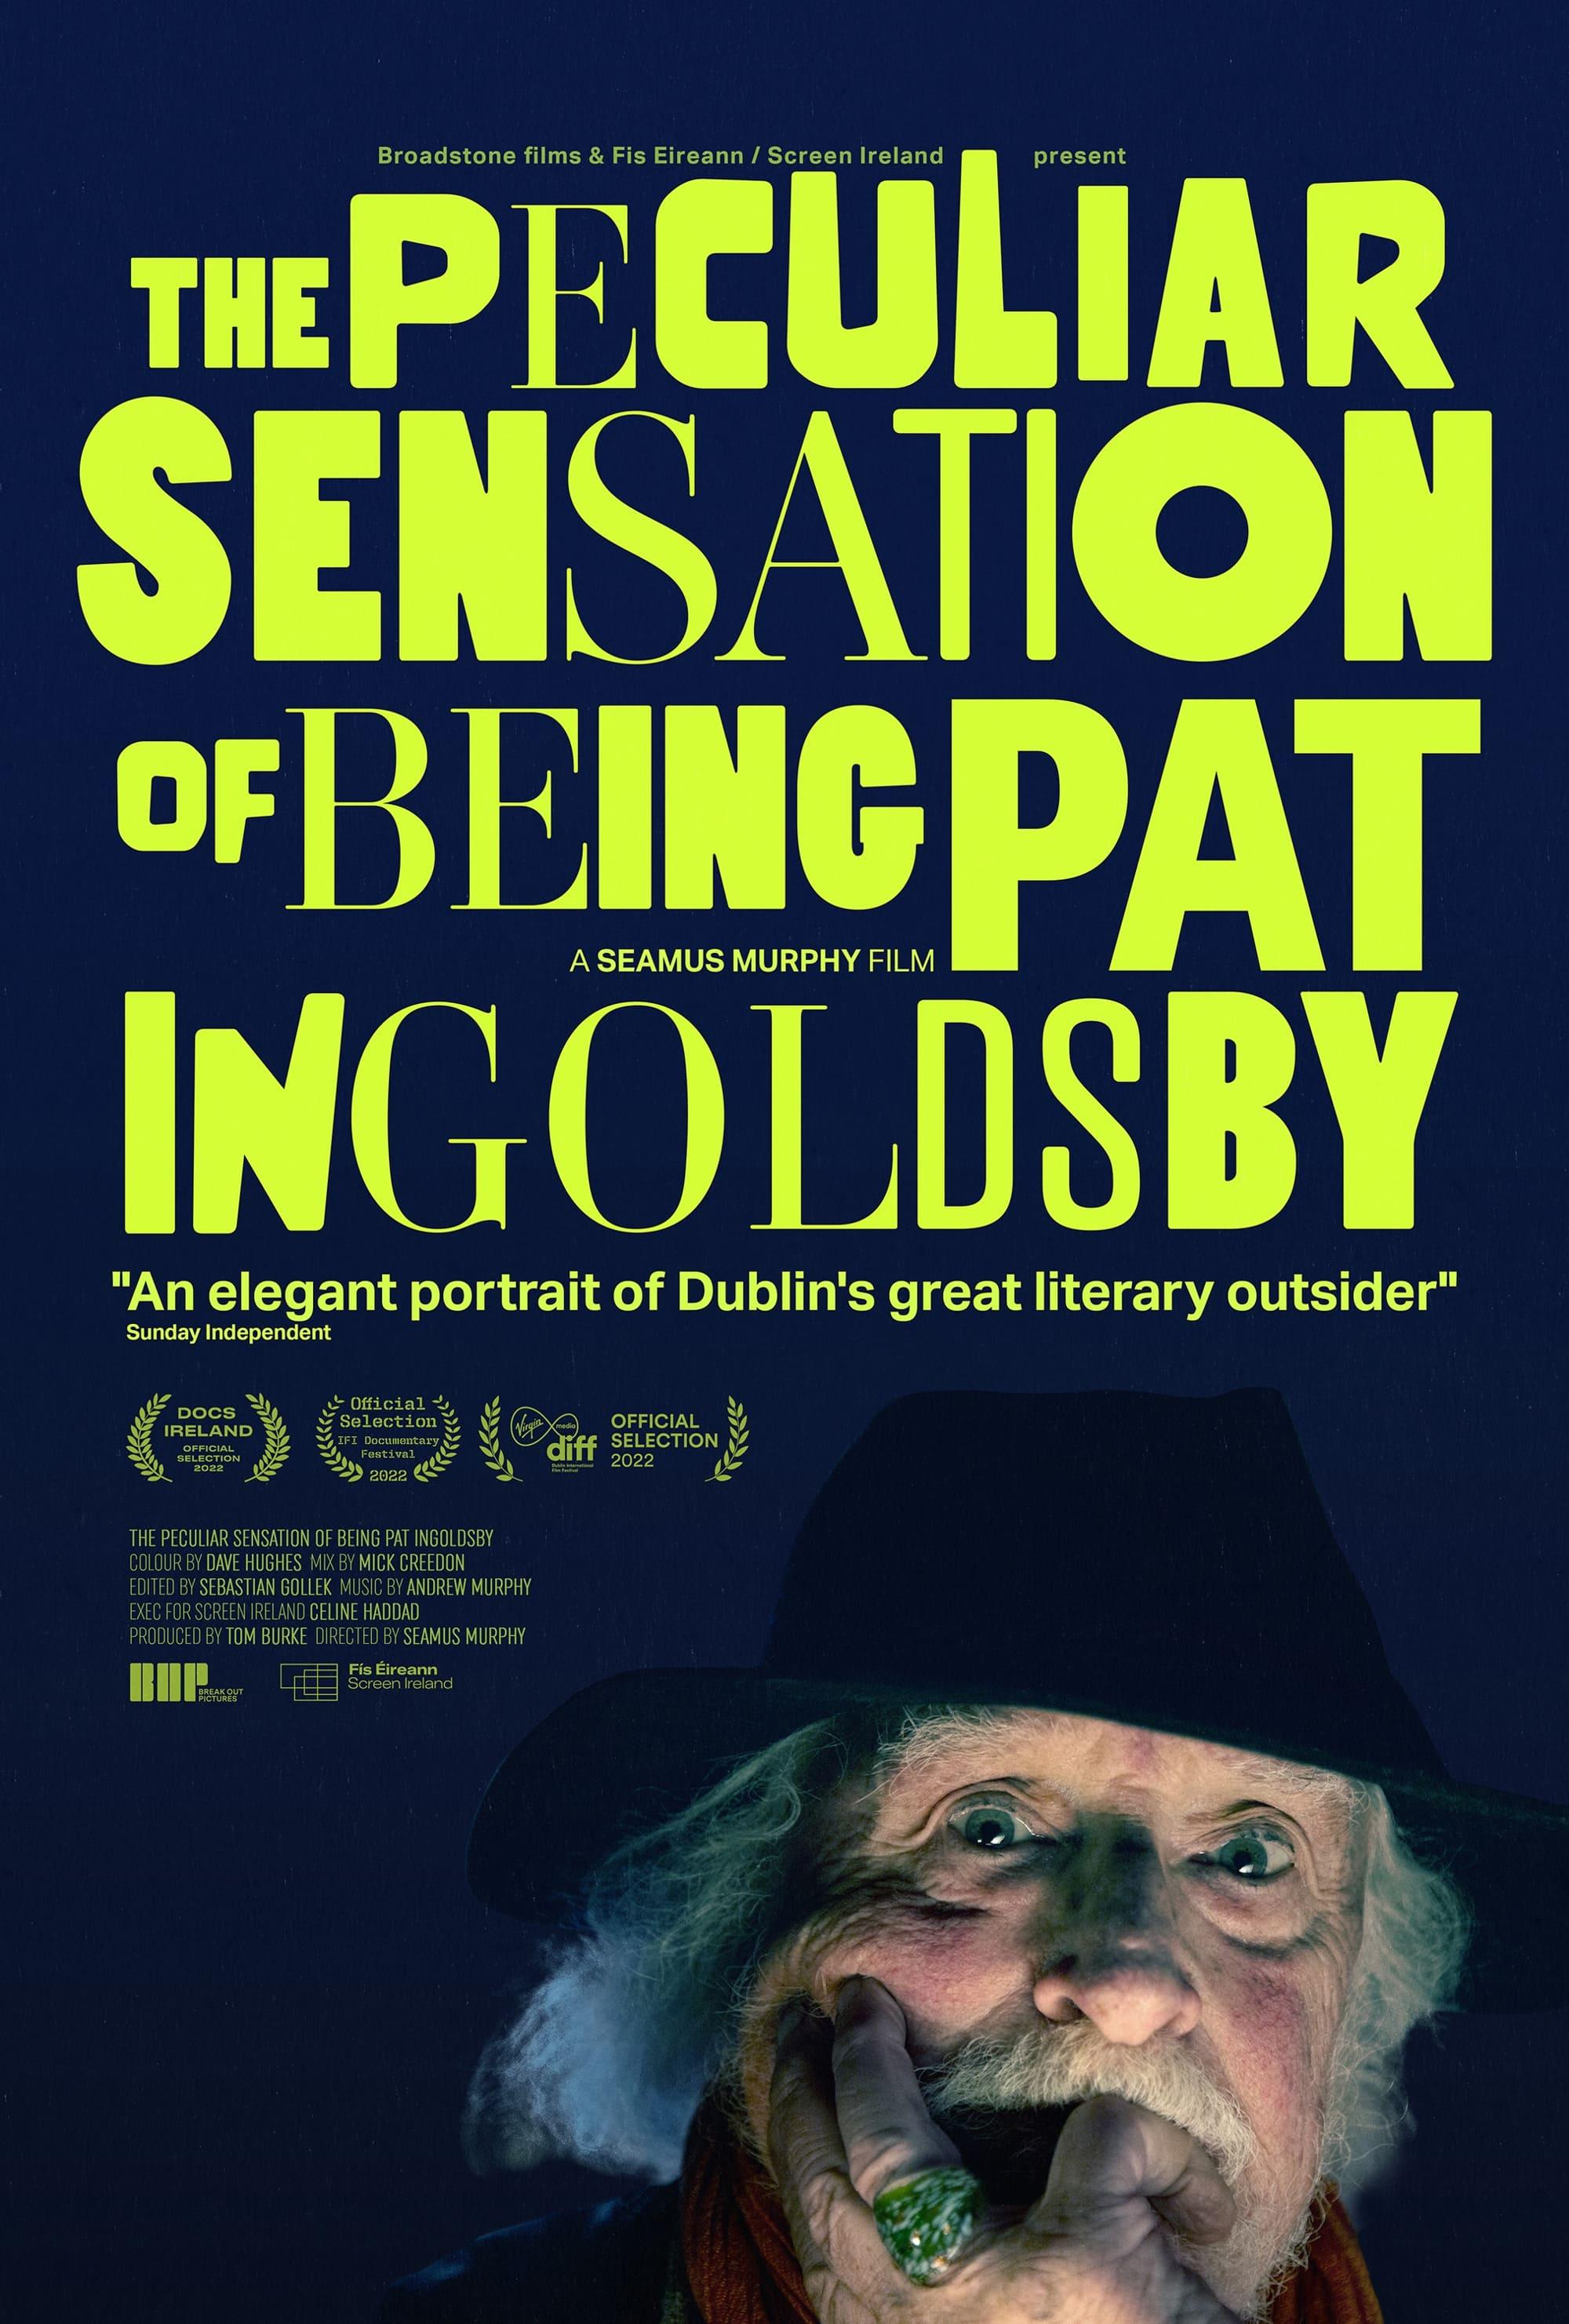 The Peculiar Sensation of Being Pat Ingoldsby poster